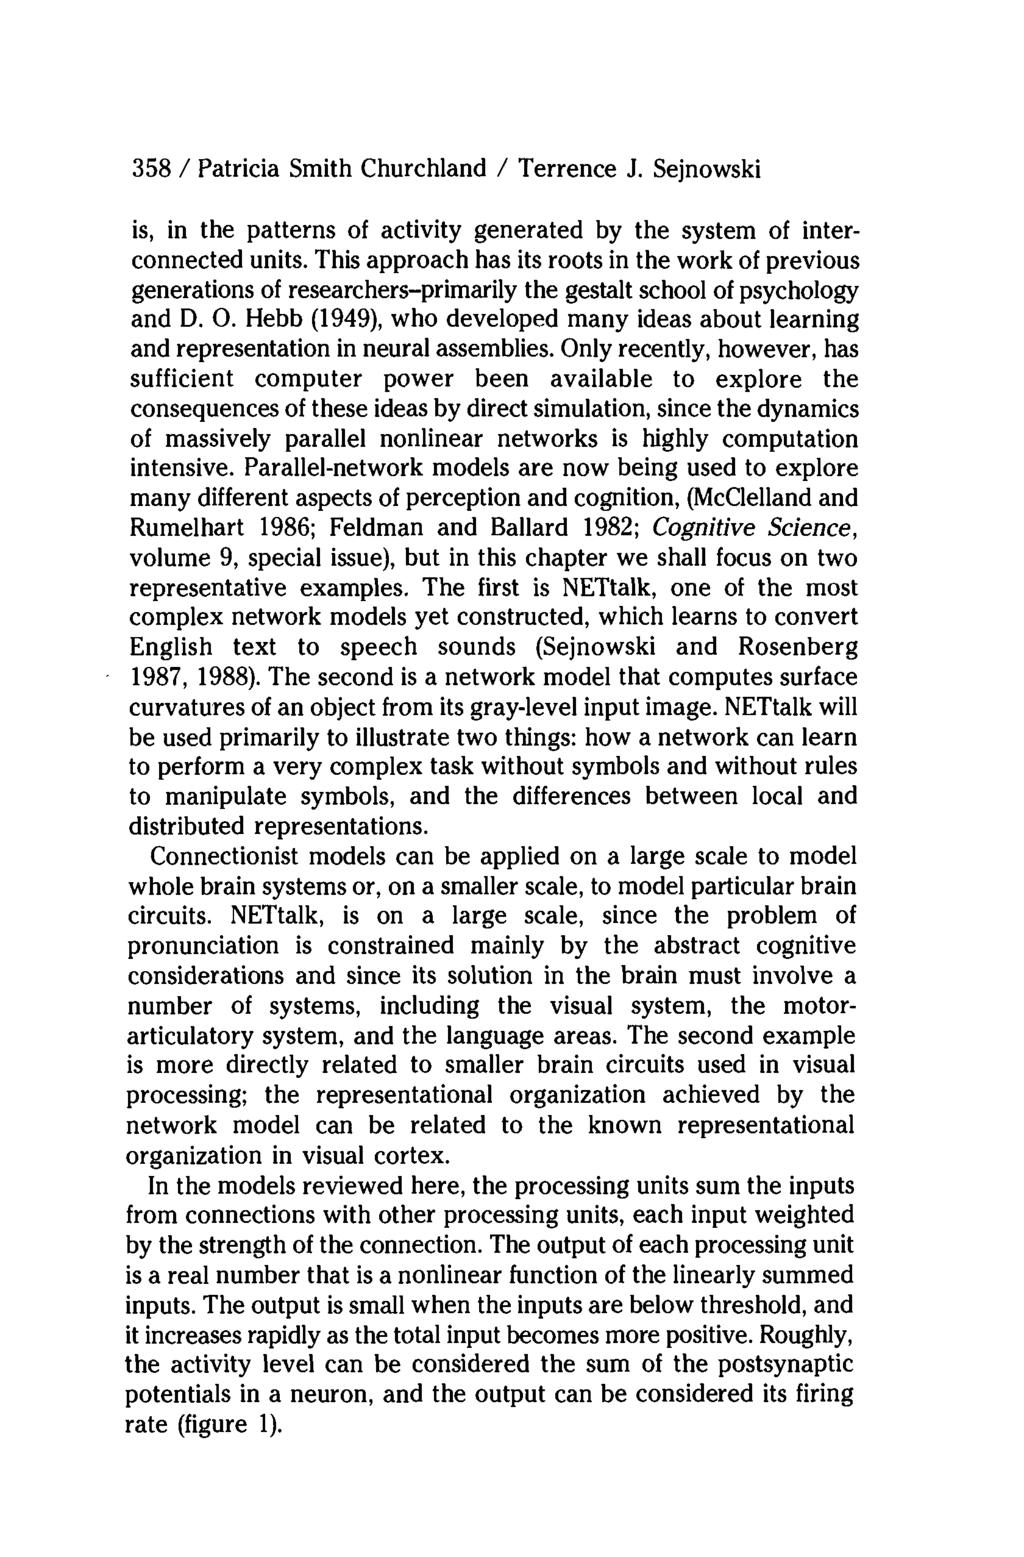 358 / Patricia Smith Churchland / Terrence J. Sejnowski is, in the patterns of activity generated by the system of interconnected units.